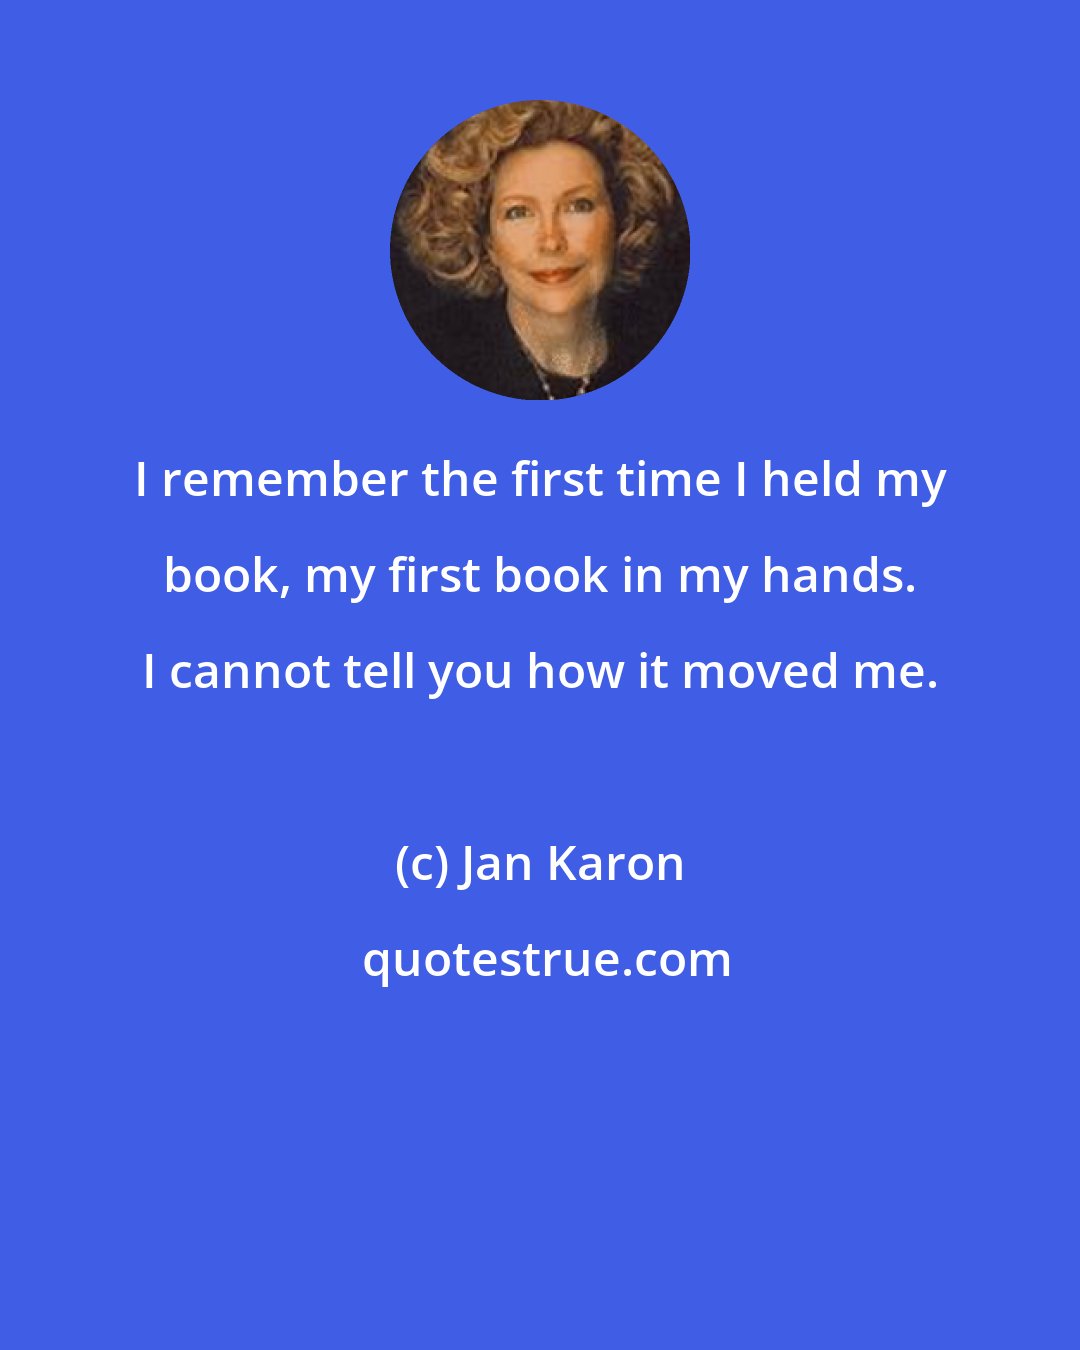 Jan Karon: I remember the first time I held my book, my first book in my hands. I cannot tell you how it moved me.